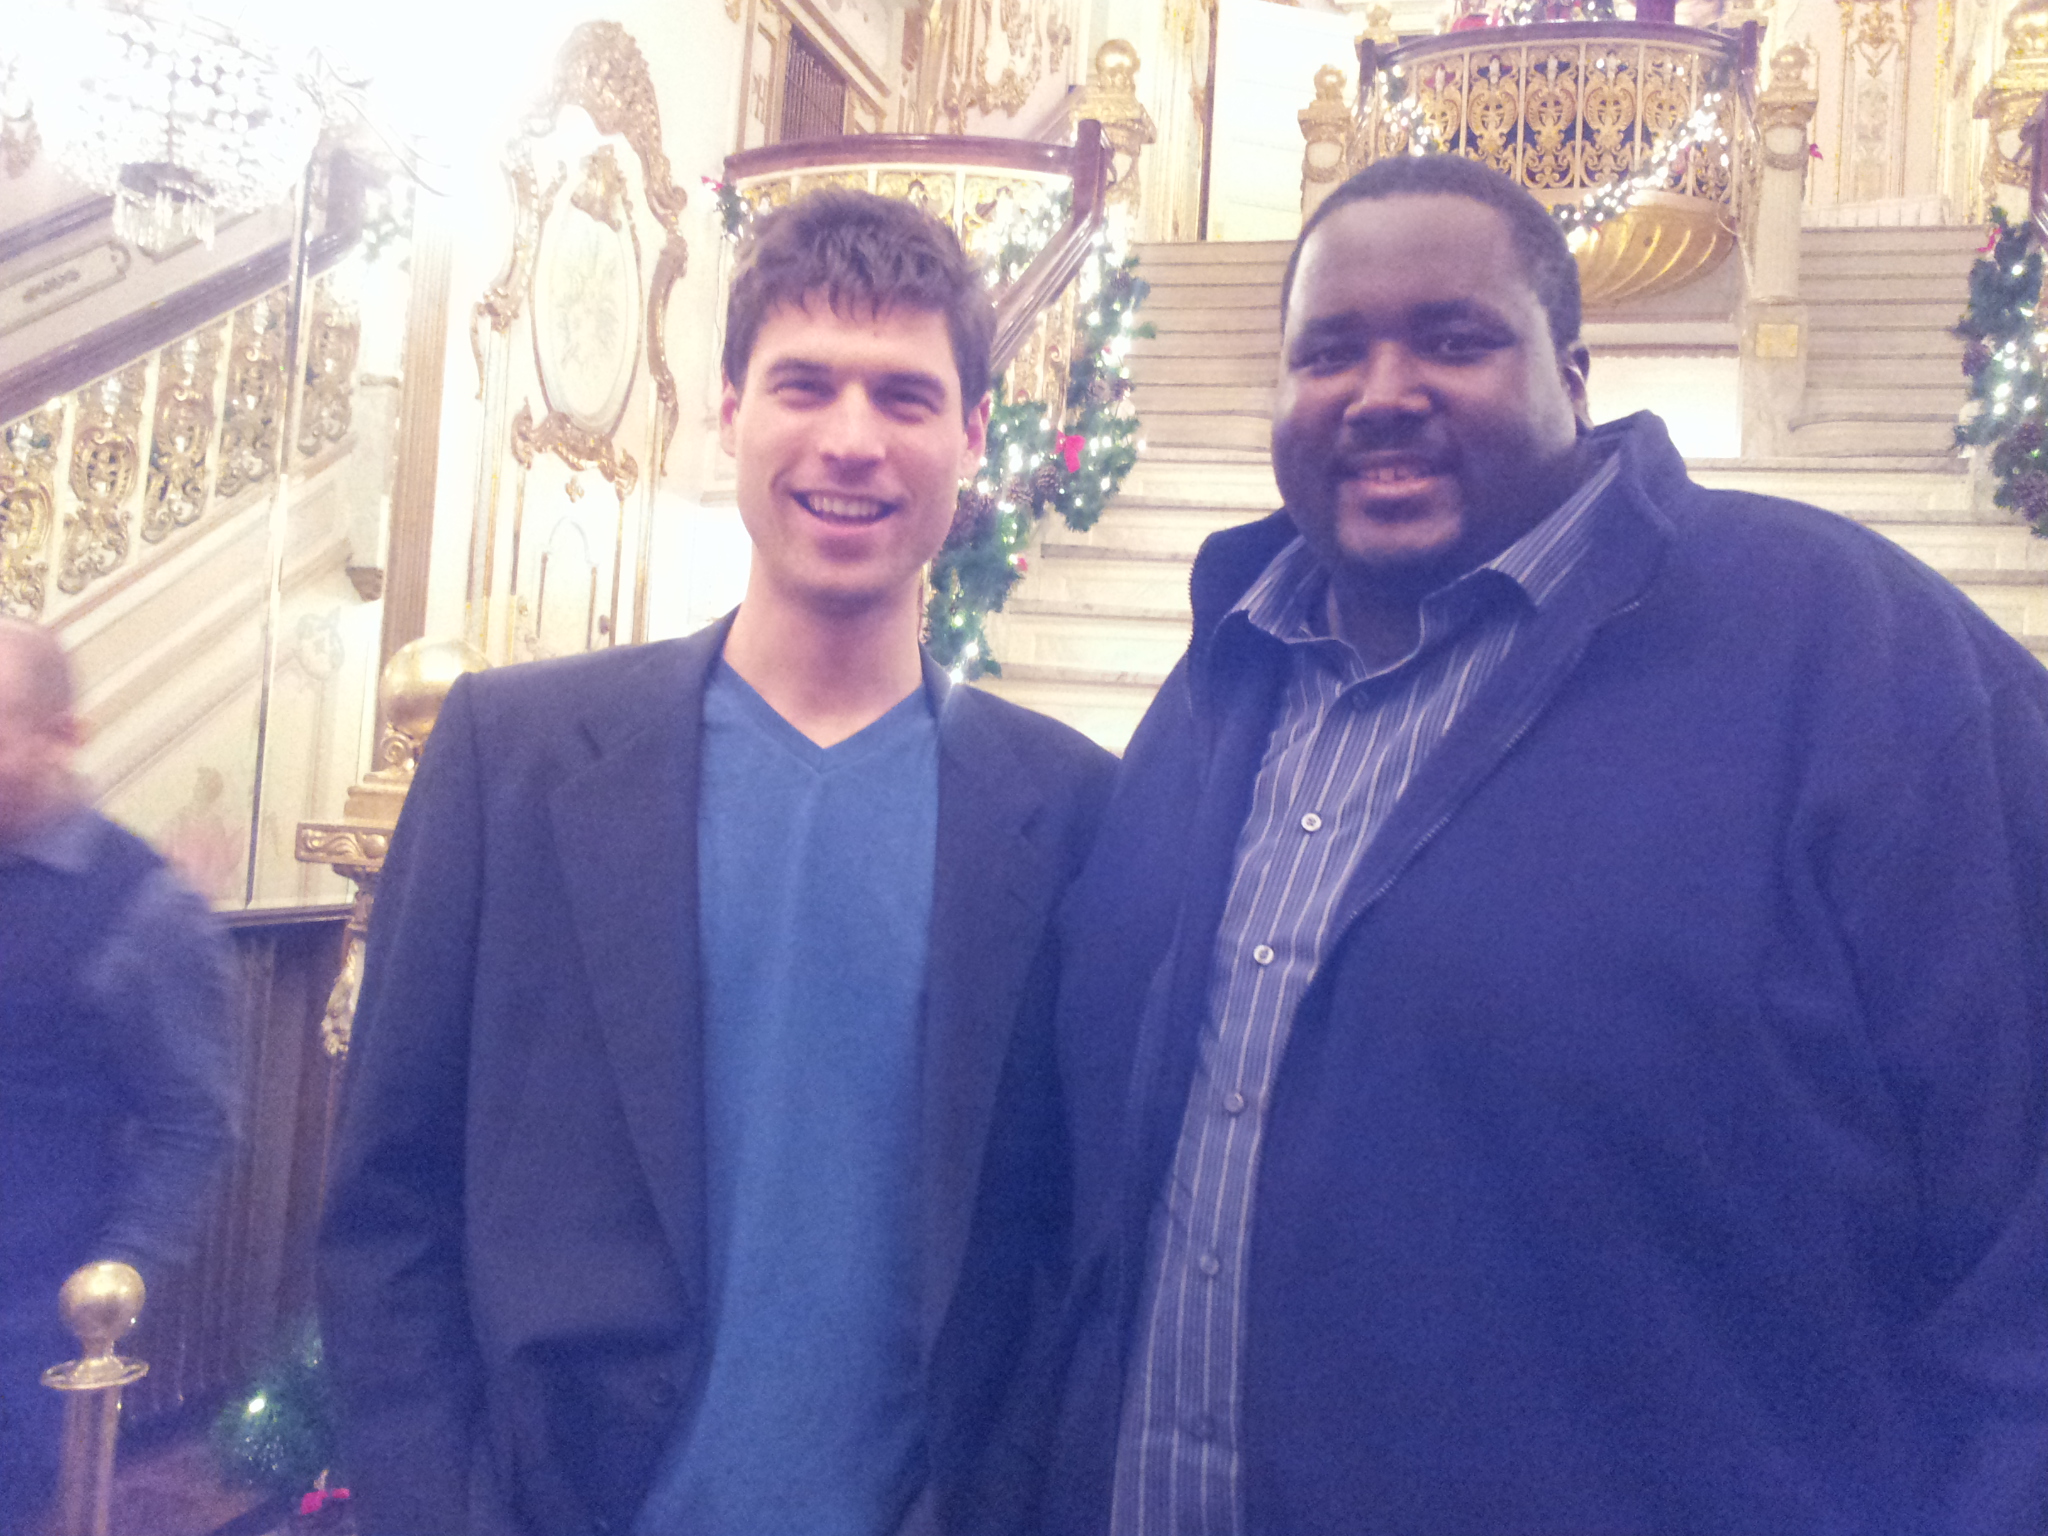 with Quinton Aaron (The Blind Side)at Doonby screening.